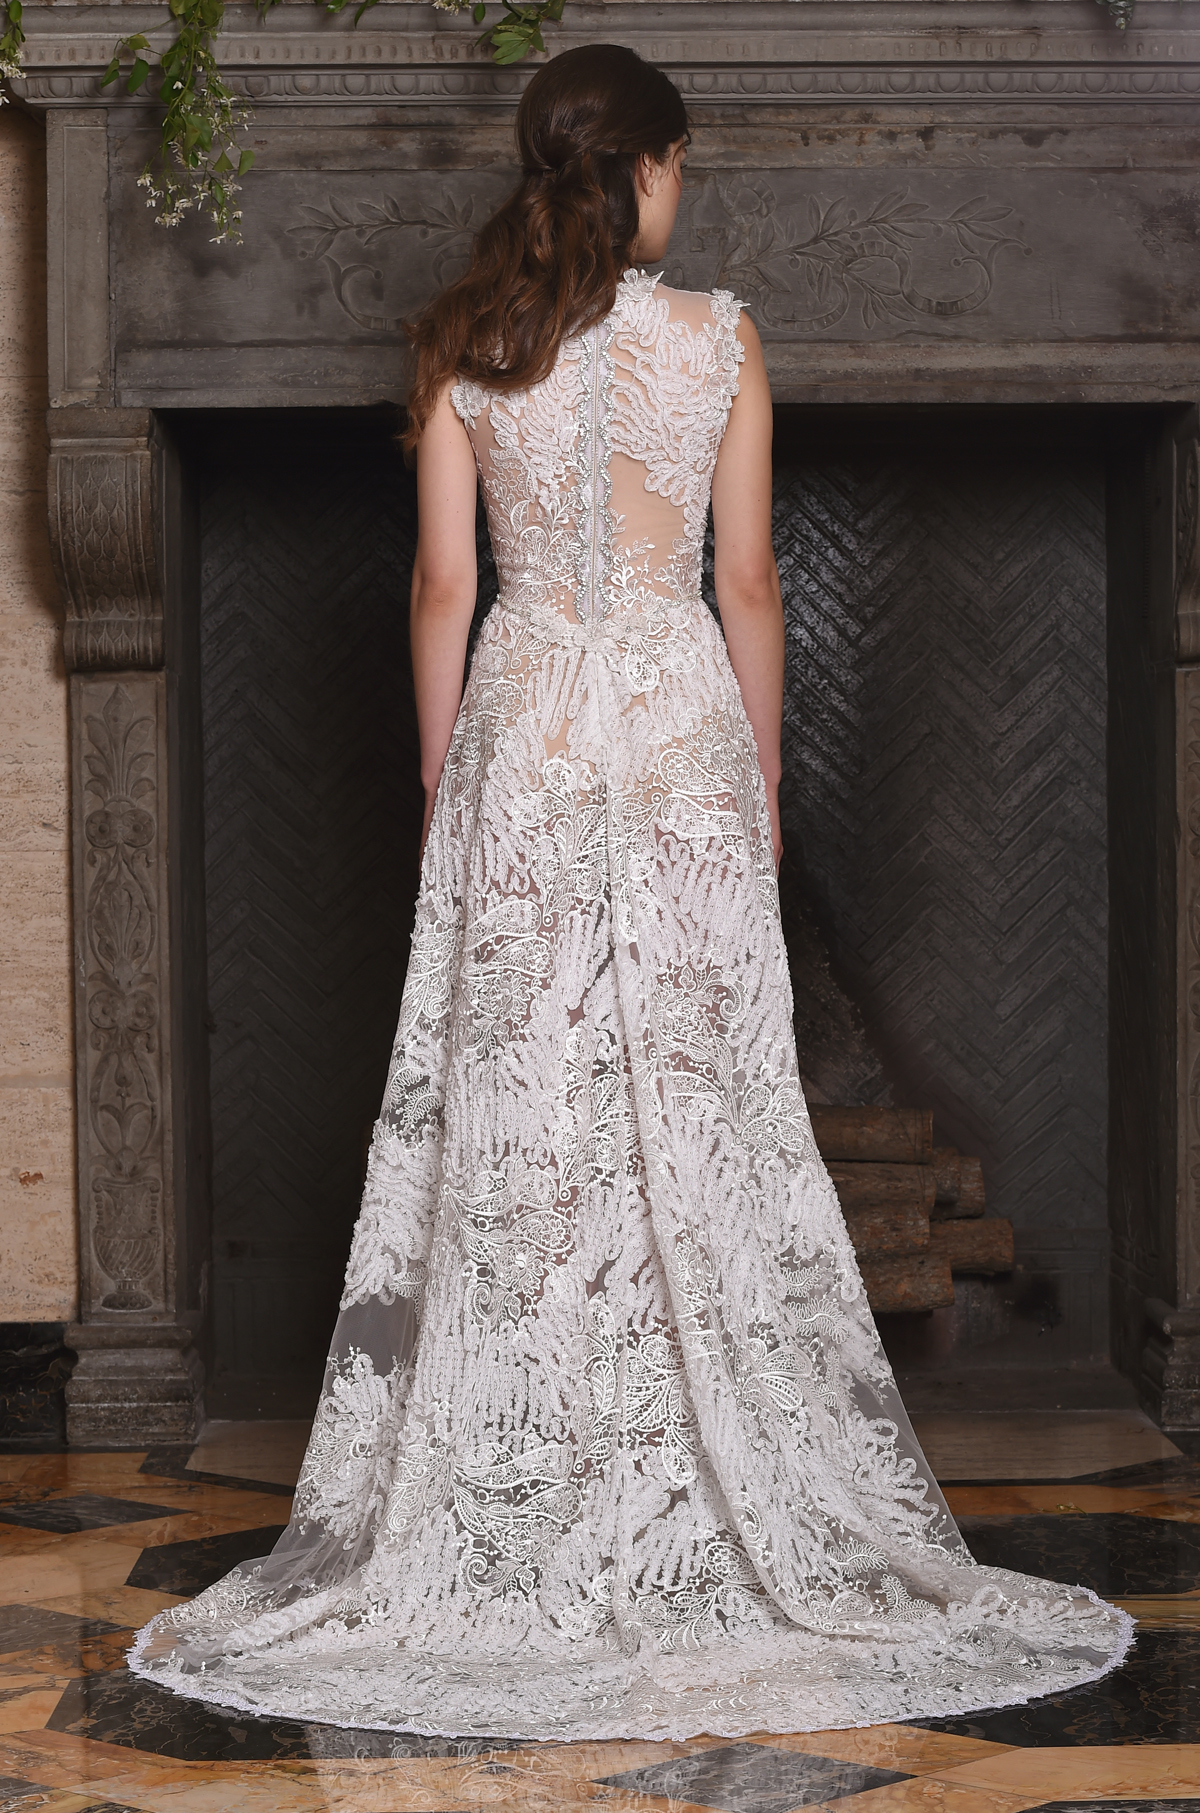 The Snow gown, from Claire Pettibone's 'The Four Seasons' bridal couture collection for 2017.